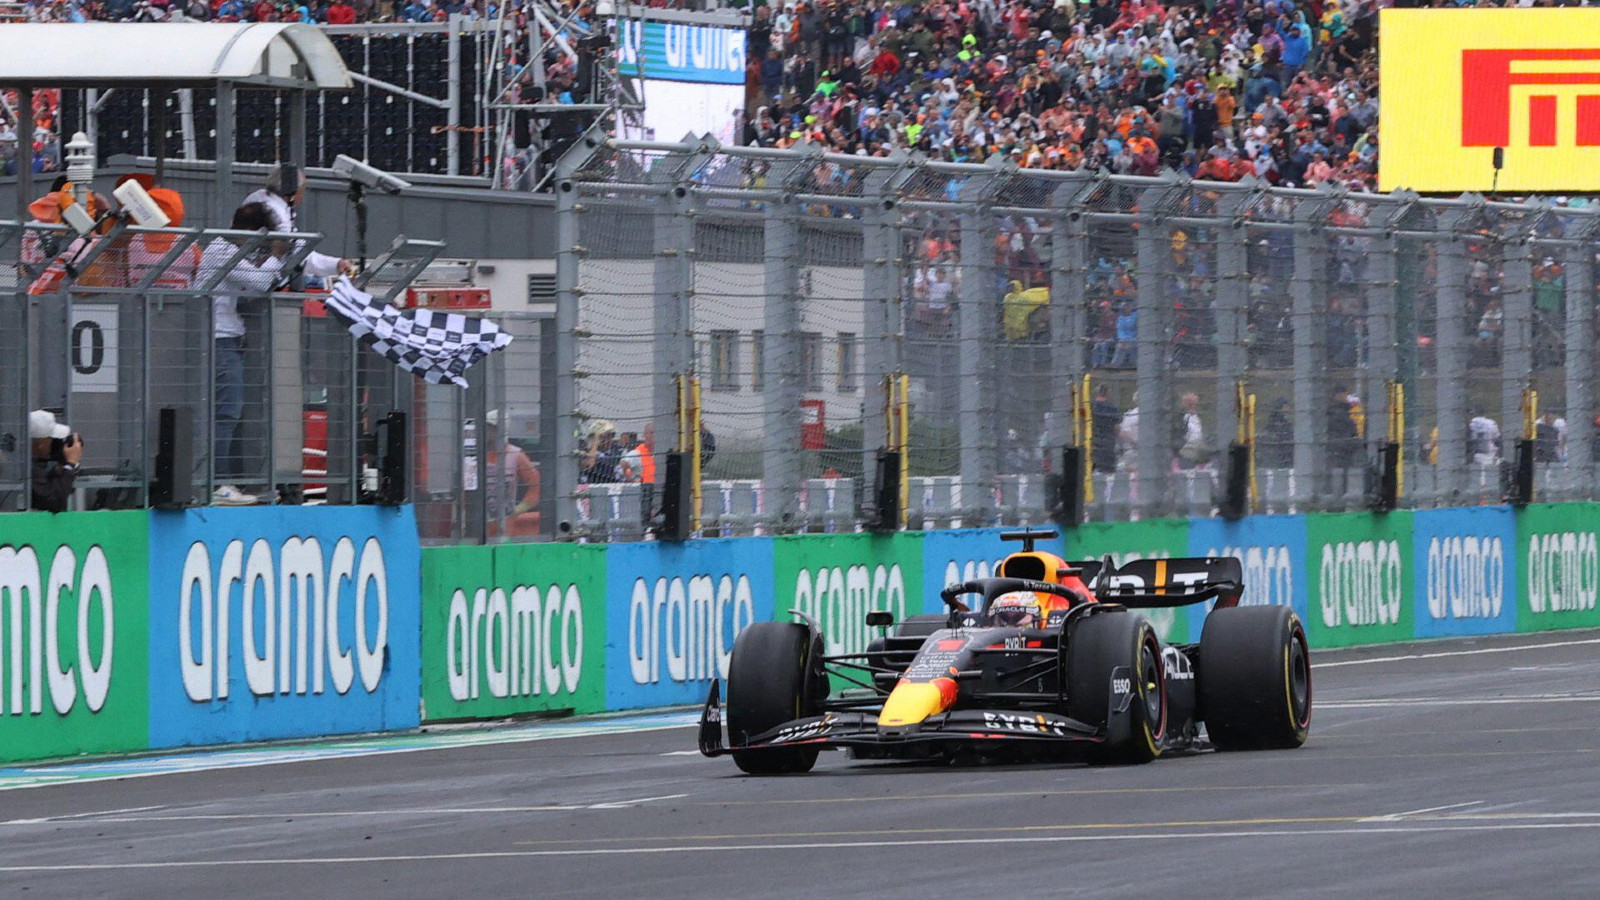 Red Bull's Max Verstappen wins the Hungarian Grand Prix. Budapest, July 2022.